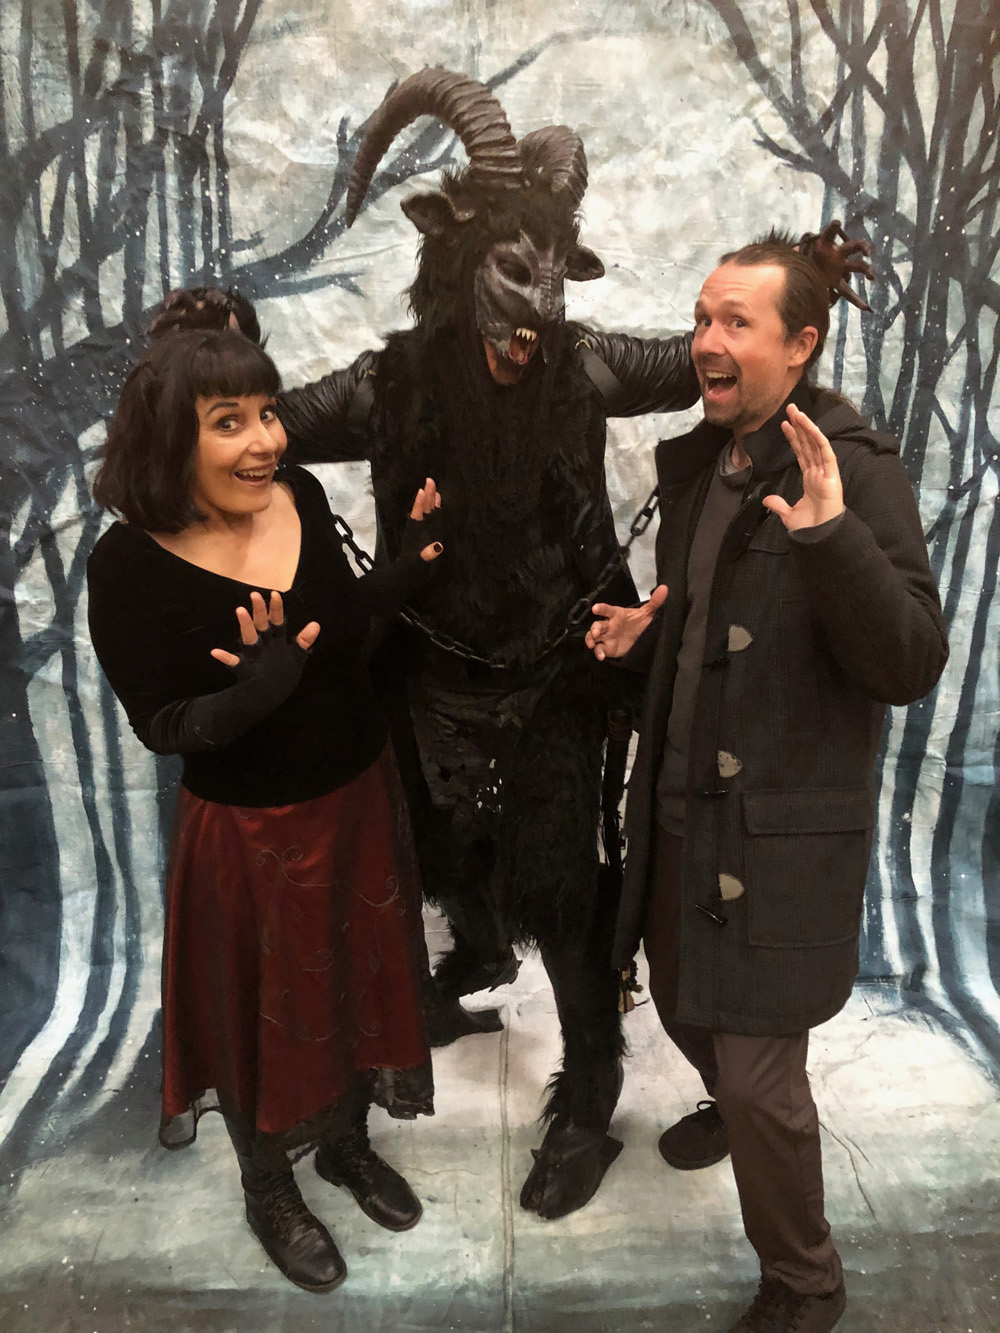 Tina, Nick and Krampus. Happy Ghost